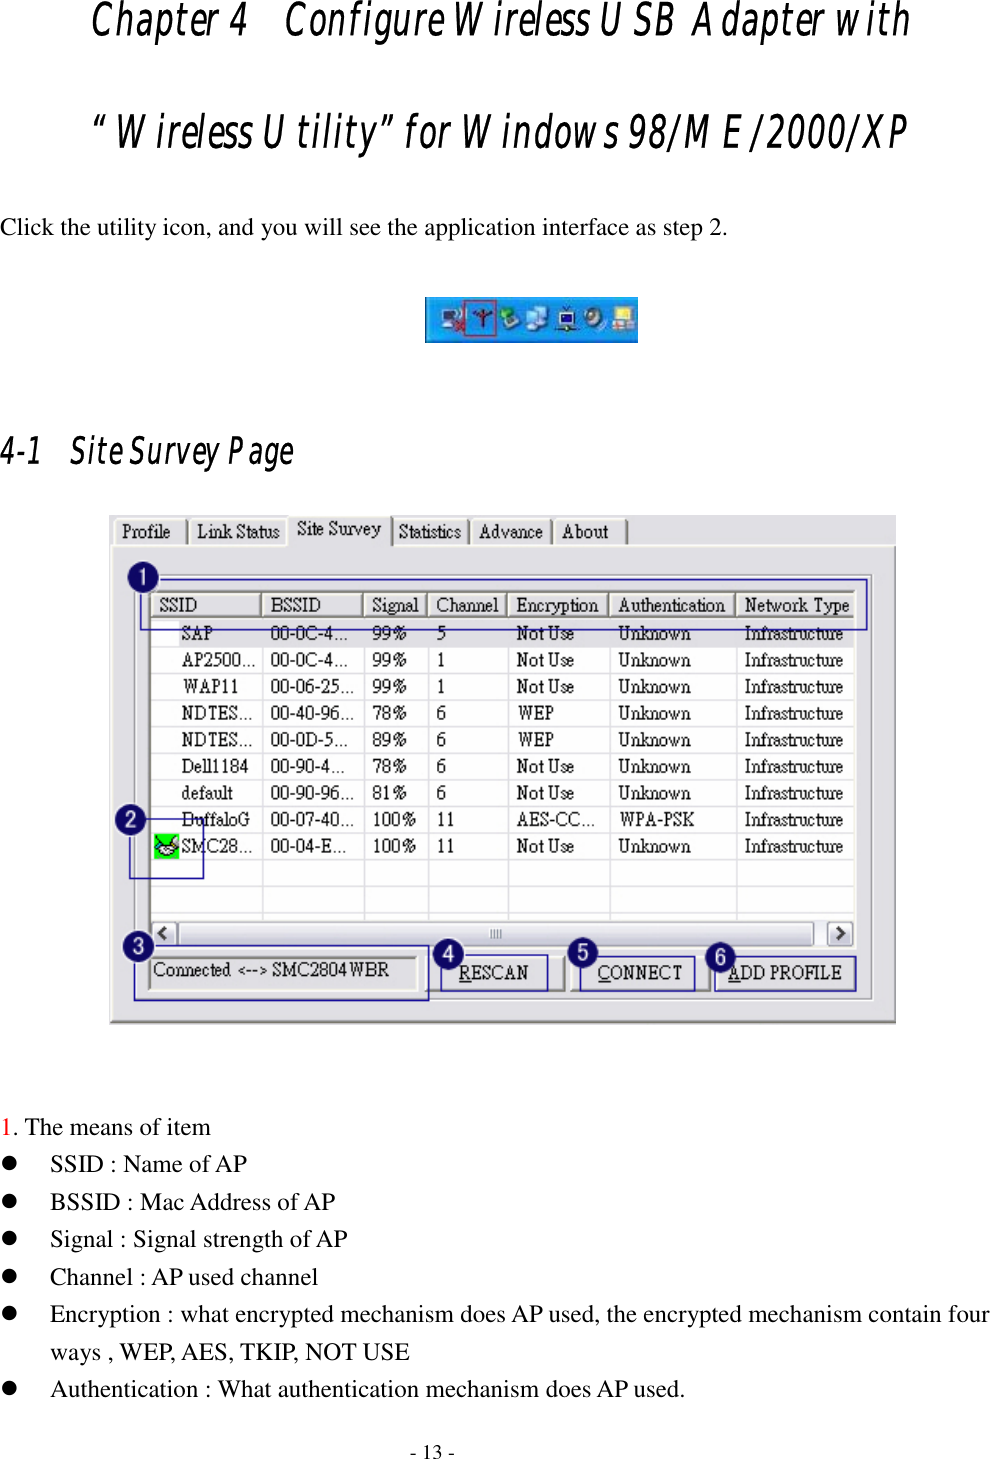    - 13 - Chapter 4   Configure Wireless USB Adapter with   “ Wireless Utility” for Windows 98/ME/2000/XP Click the utility icon, and you will see the application interface as step 2.      4-1   Site Survey Page    1. The means of item z SSID : Name of AP z BSSID : Mac Address of AP z Signal : Signal strength of AP z Channel : AP used channel z Encryption : what encrypted mechanism does AP used, the encrypted mechanism contain four ways , WEP, AES, TKIP, NOT USE z Authentication : What authentication mechanism does AP used. 